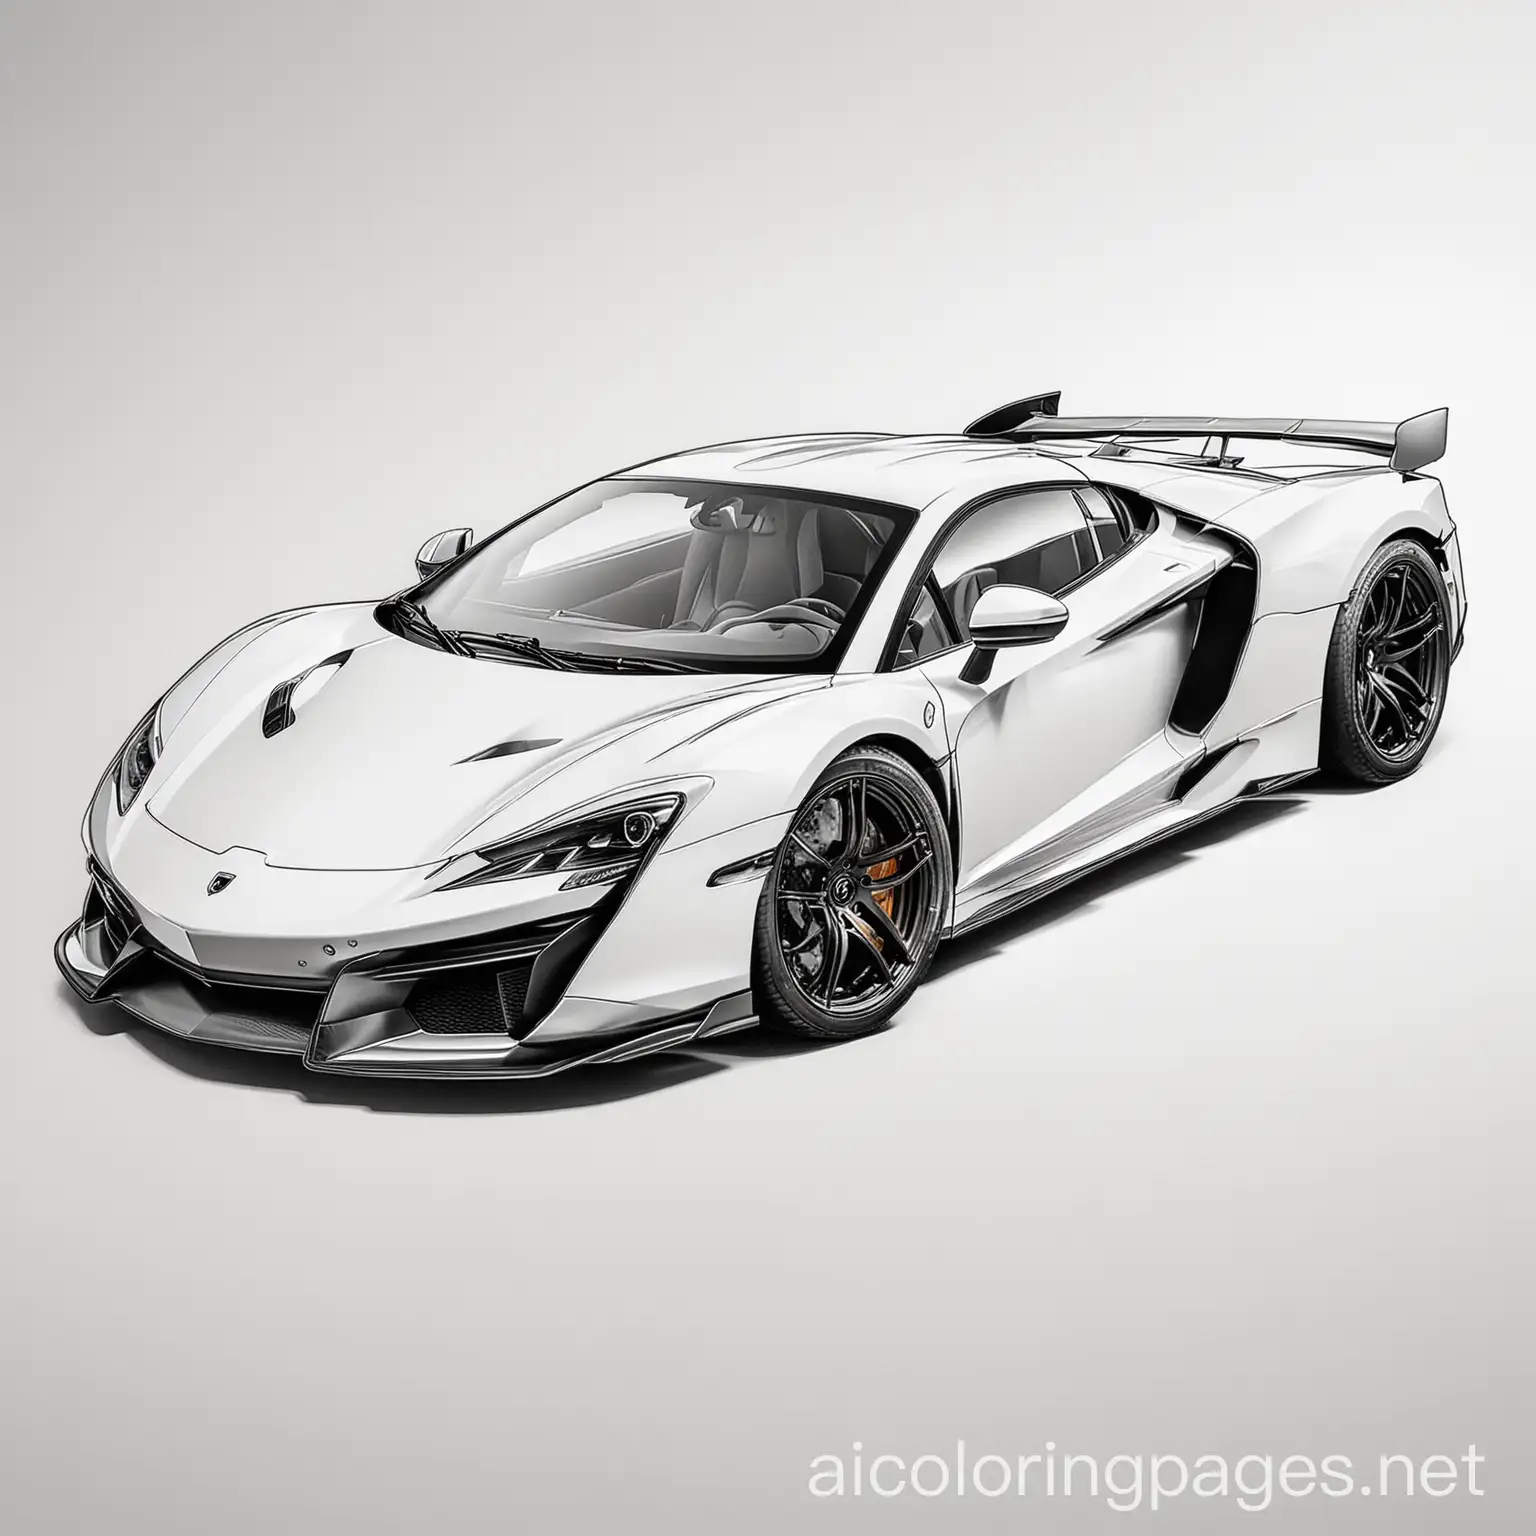 Luxury-Sports-Car-Coloring-Page-HighEnd-Design-for-Creative-Coloring